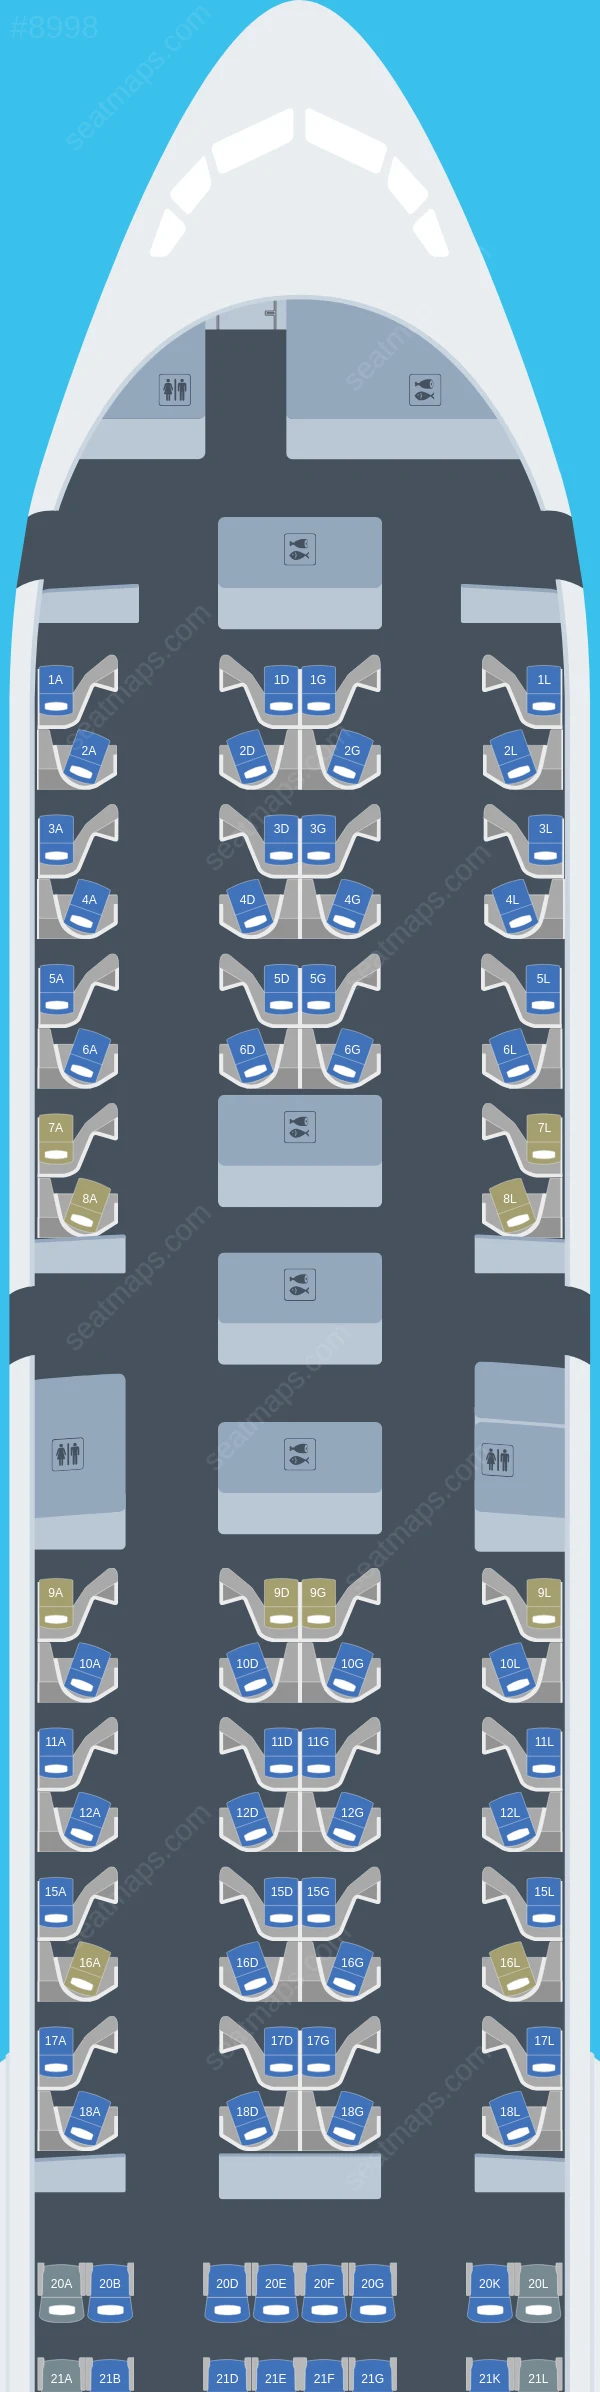 United Boeing 777-300ER seatmap preview